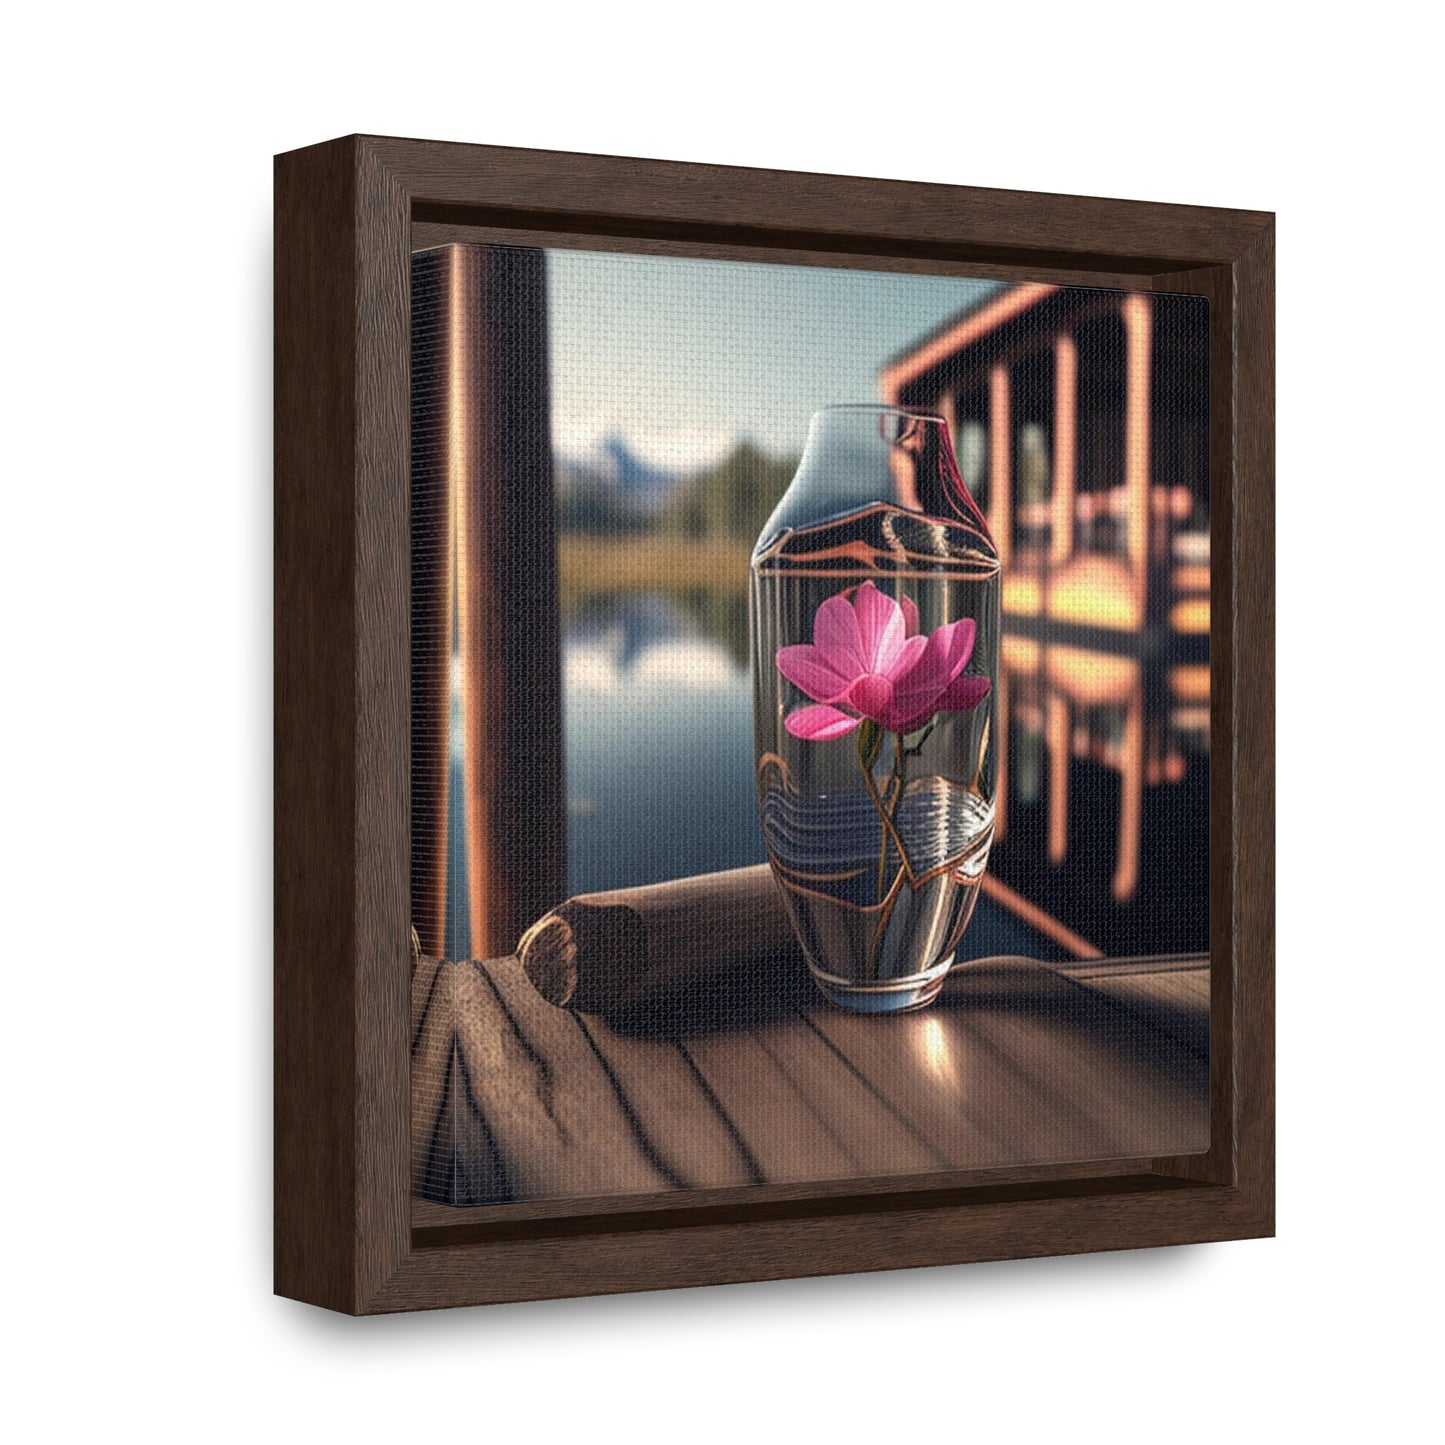 Gallery Canvas Wraps, Square Frame Magnolia in a Glass vase 3